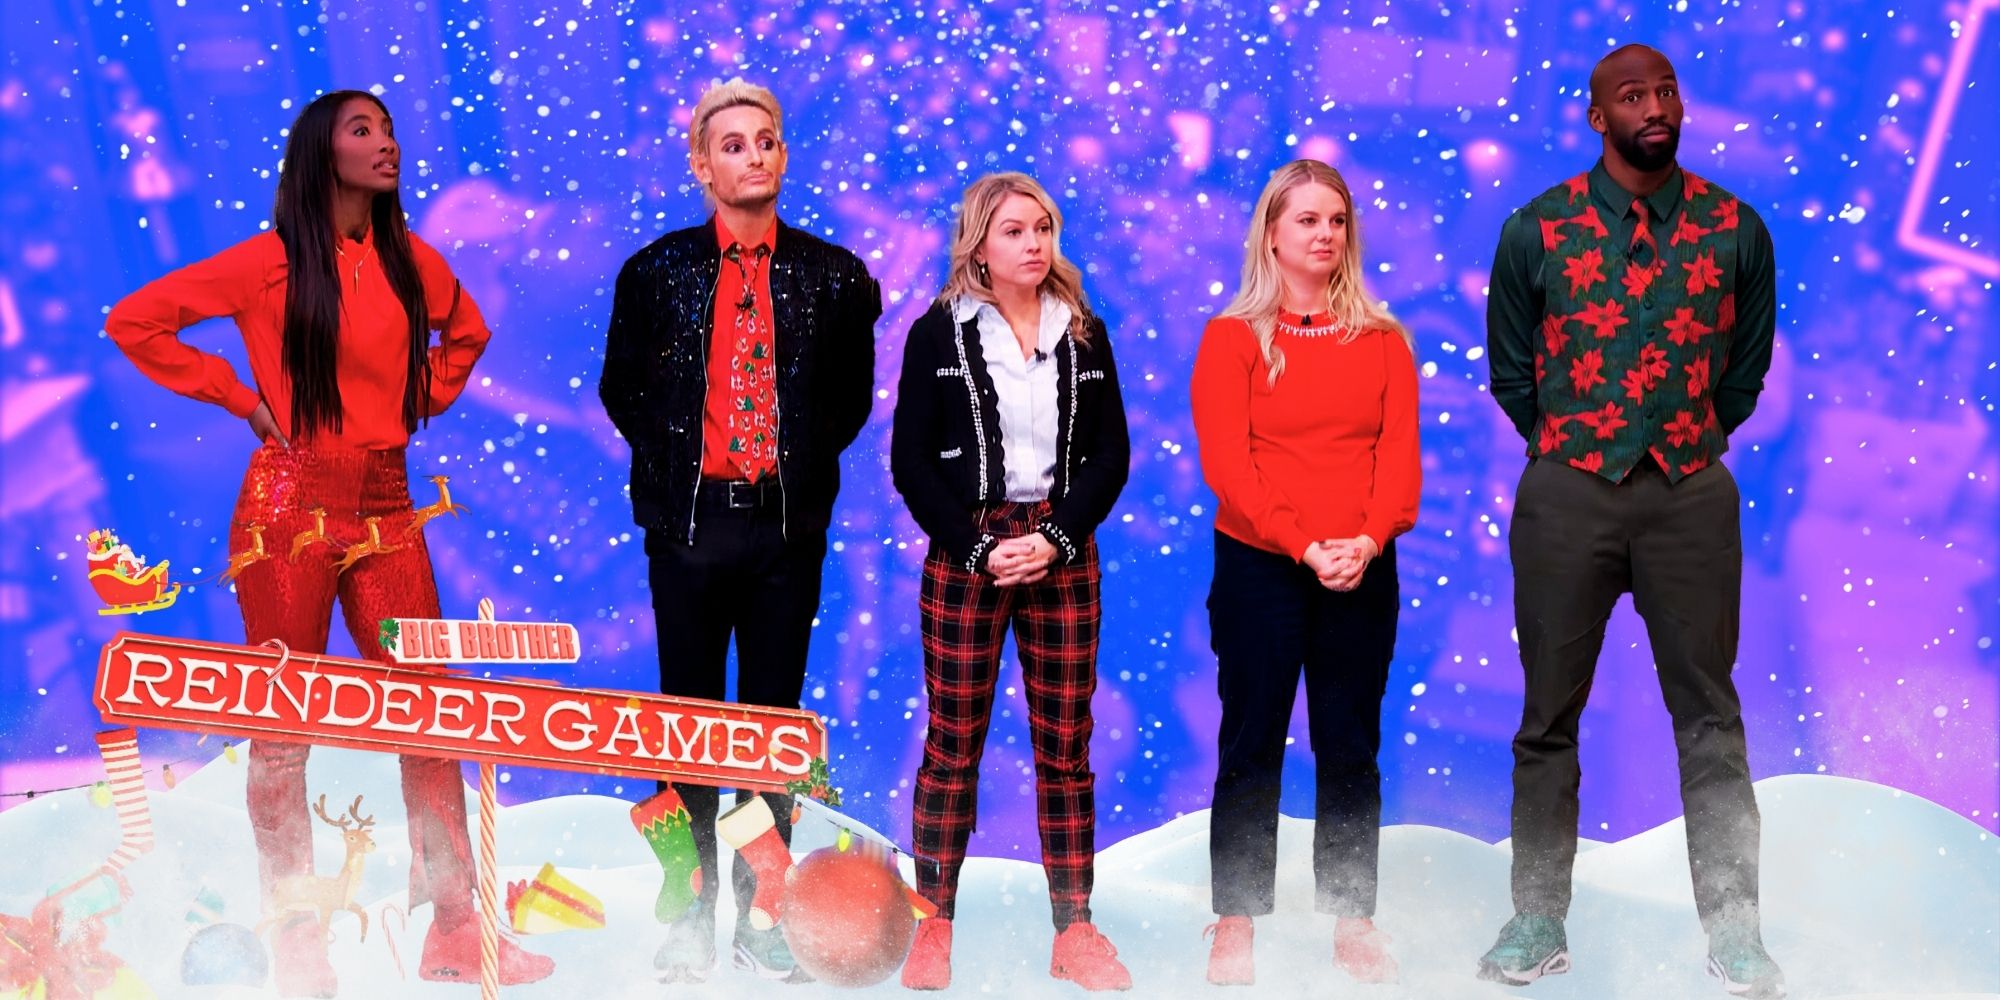 Who Is The Winner Of Big Brother Reindeer Games?